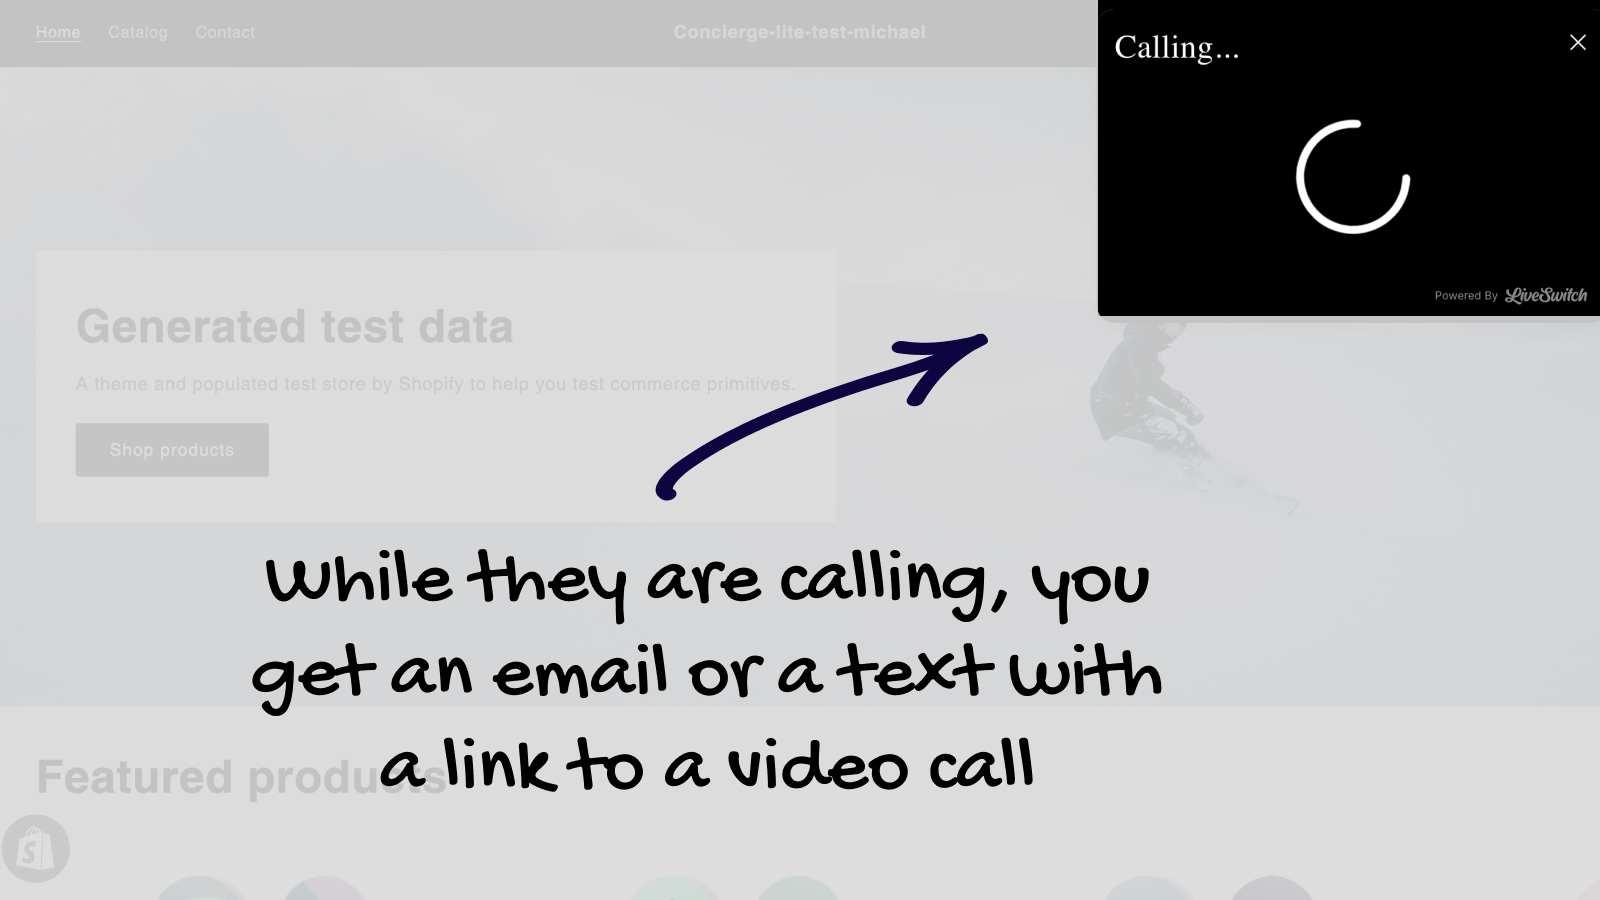 Website owner gets a message with a link to join a call.